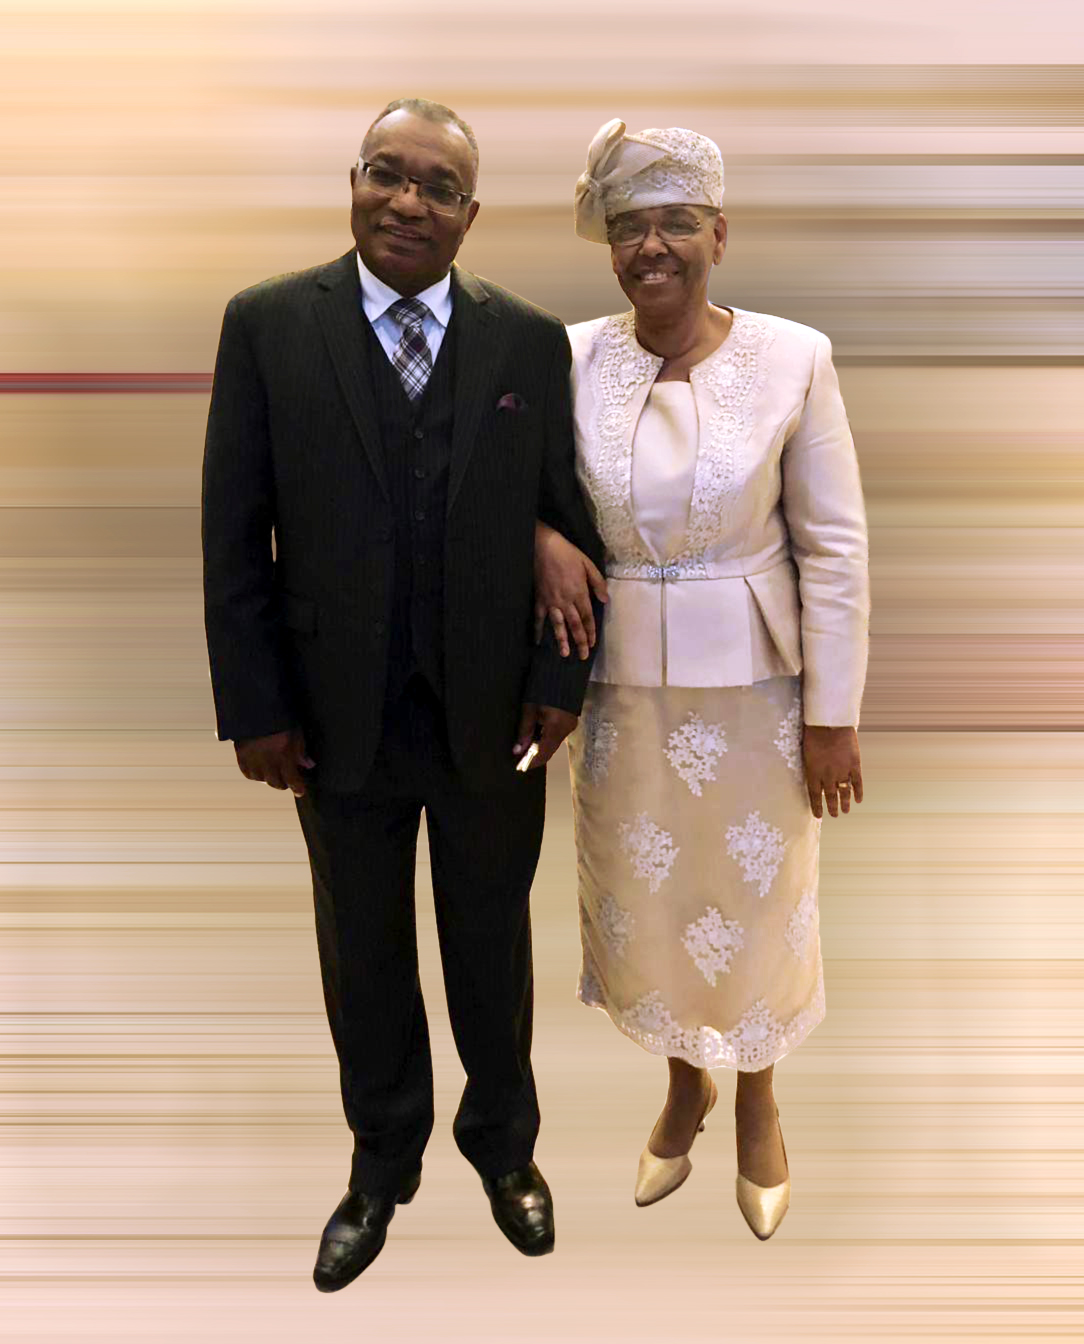 Bishop Elect & First Lady Cawley